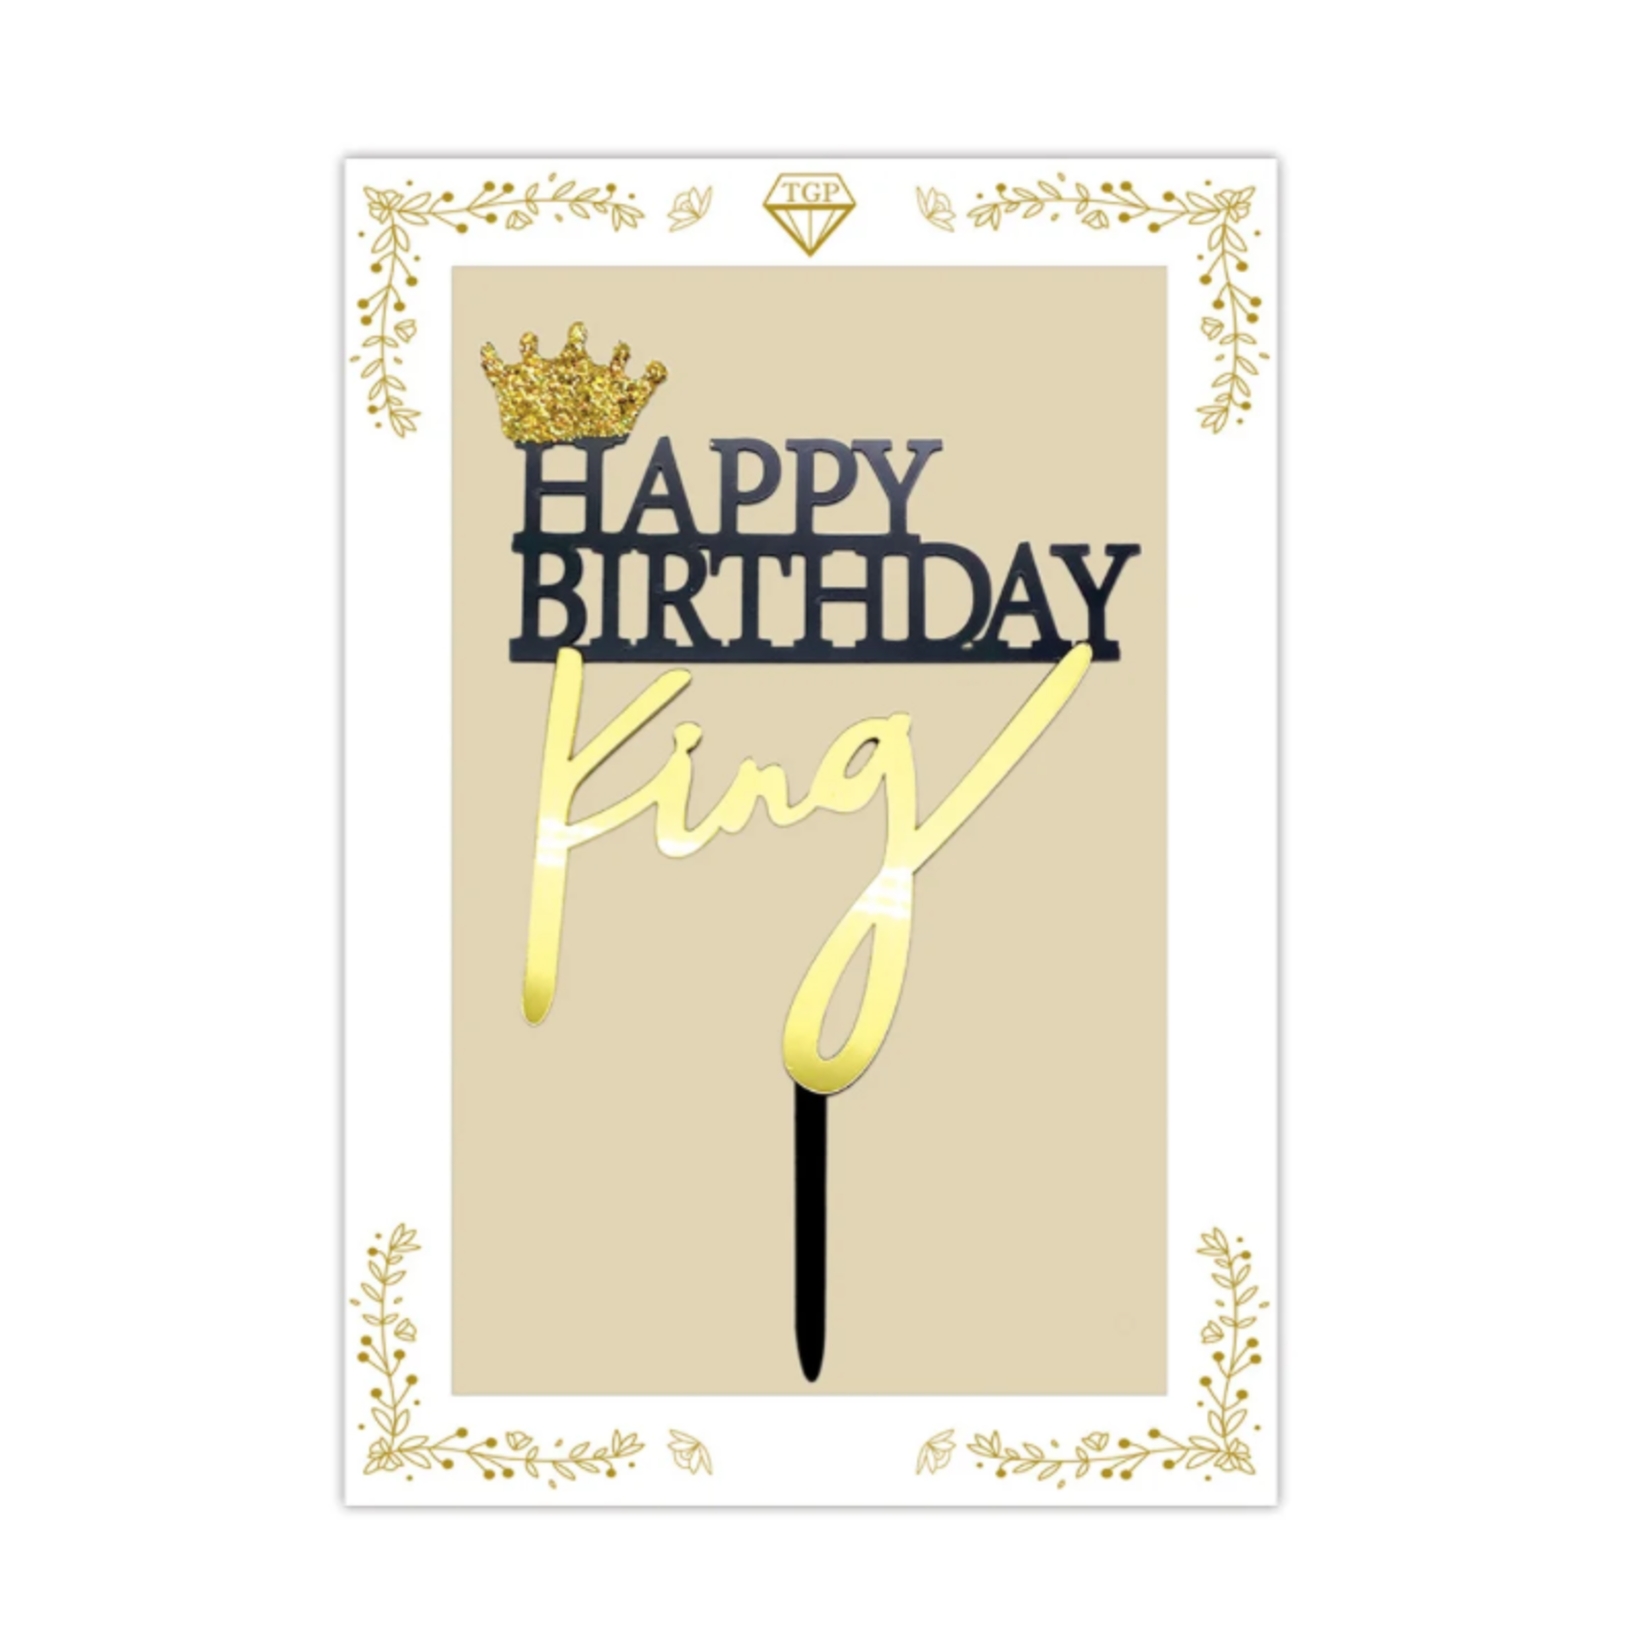 KING GOLD WITH BLACK *HAPPY BIRTHDAY” CAKE TOPPER